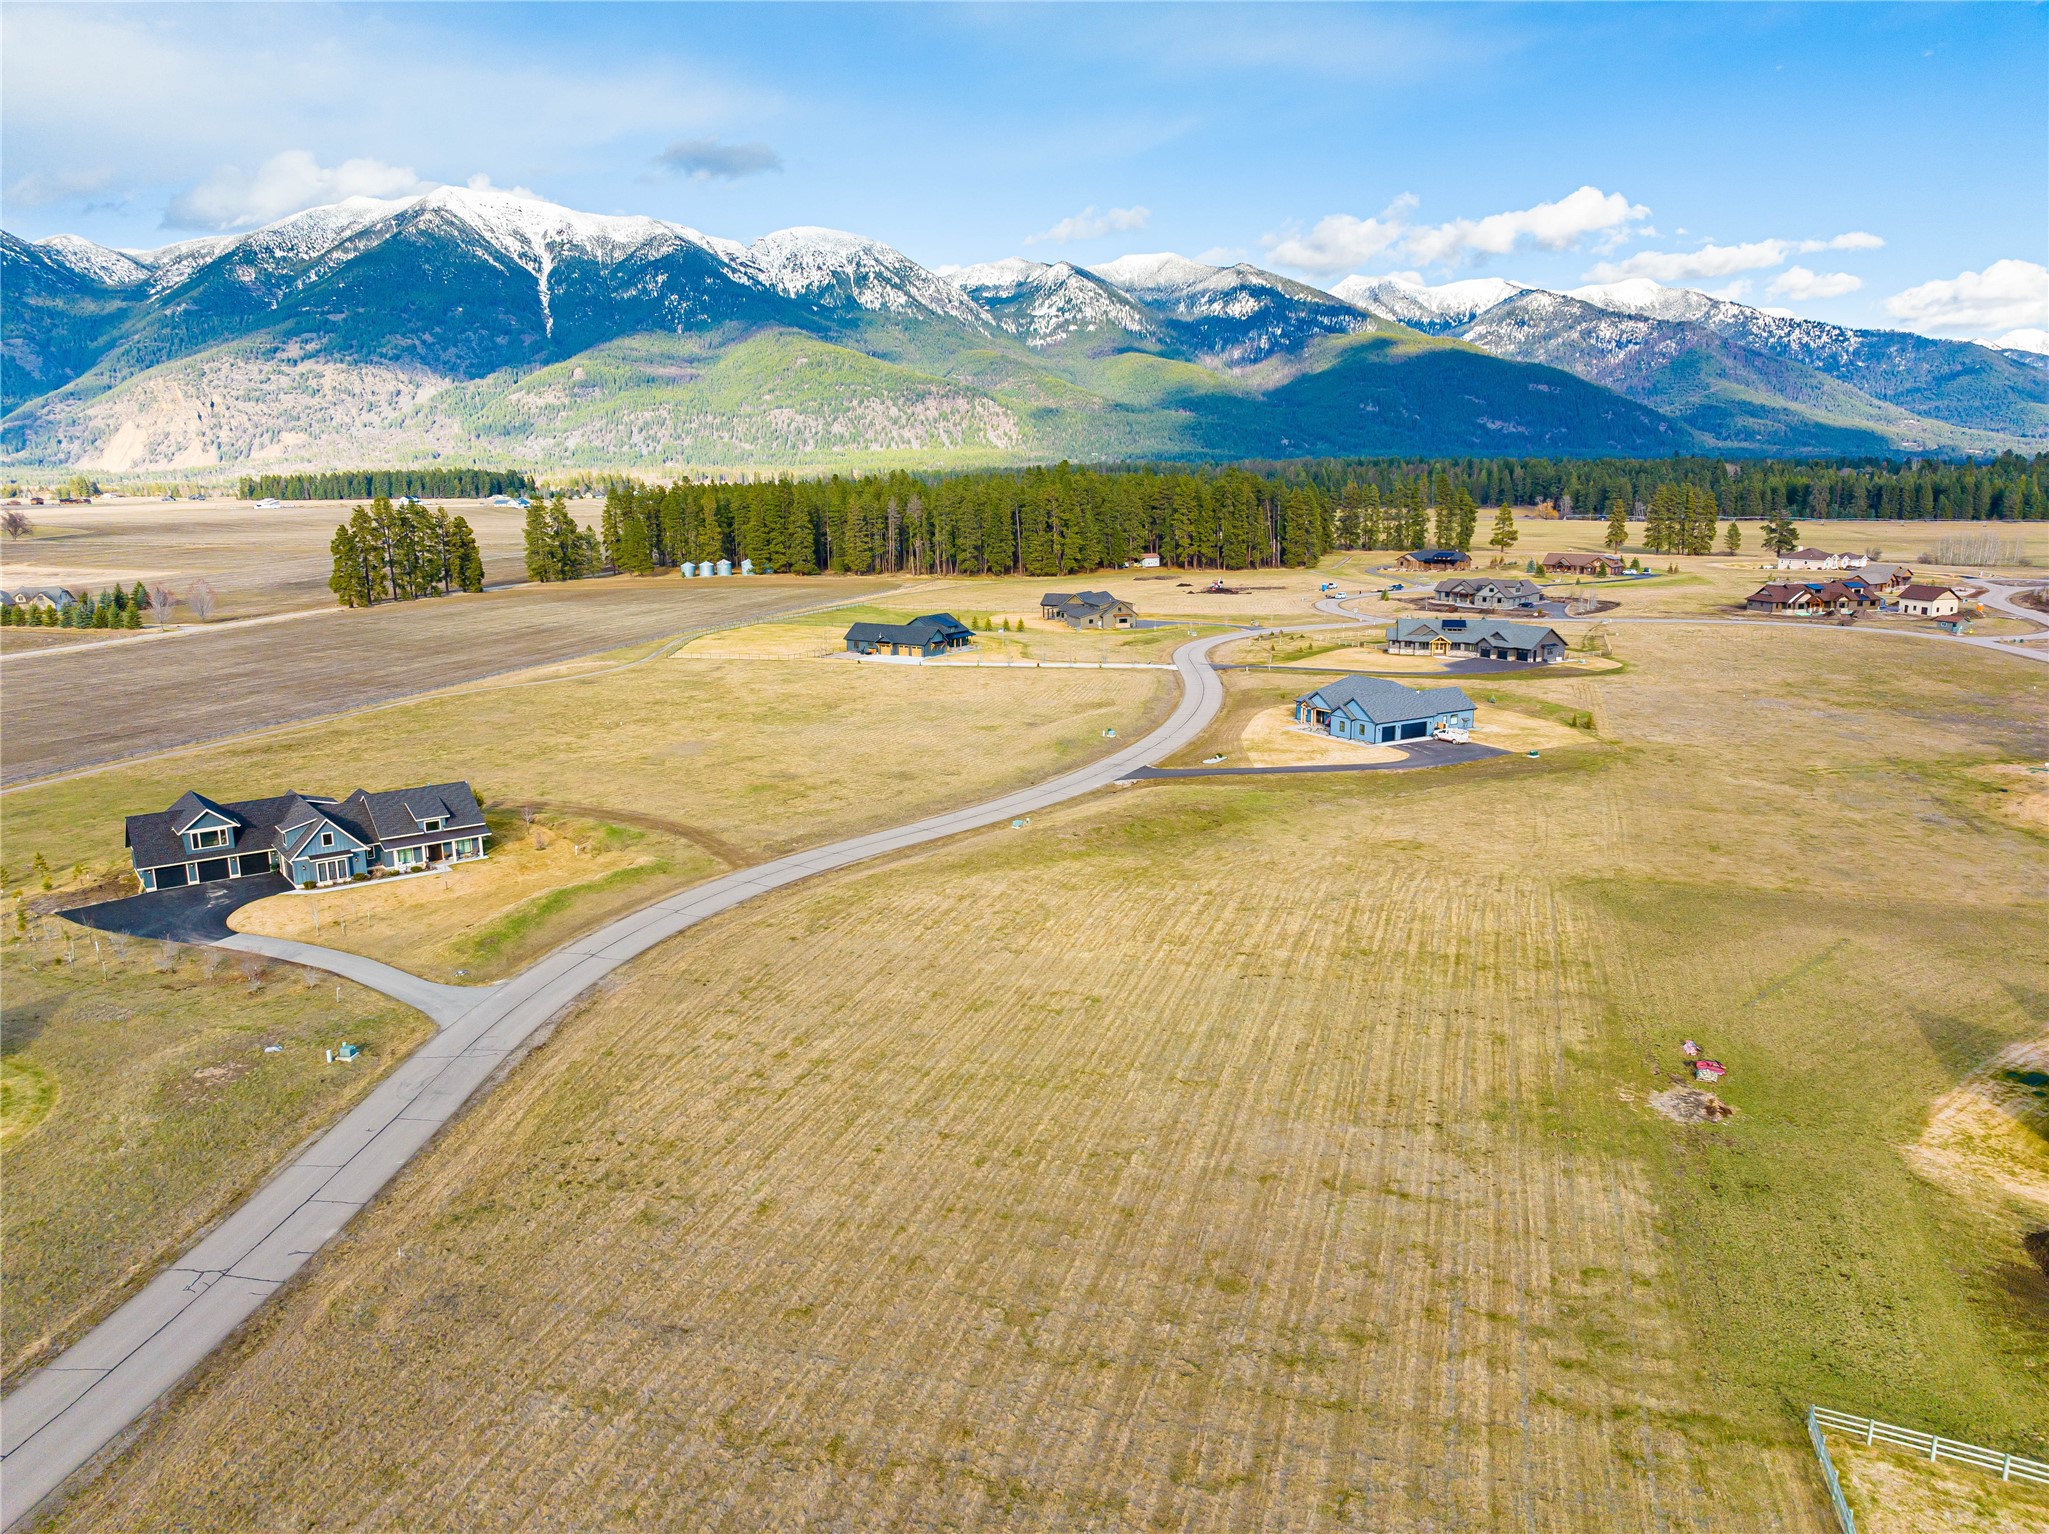 If you are looking for the ultimate Montana mountain views, then you need to come home to Sweetgrass Ranch. In addition to the panoramic views you will enjoy the deer, elk, eagles, hawks and other wildlife that visit this area. This lot offers public water, electricity, telephone, natural gas and fiber optics. Located near Glacier National Park, Whitefish Mountain Resort, Flathead Lake and within 10 miles of downtown Kalispell.